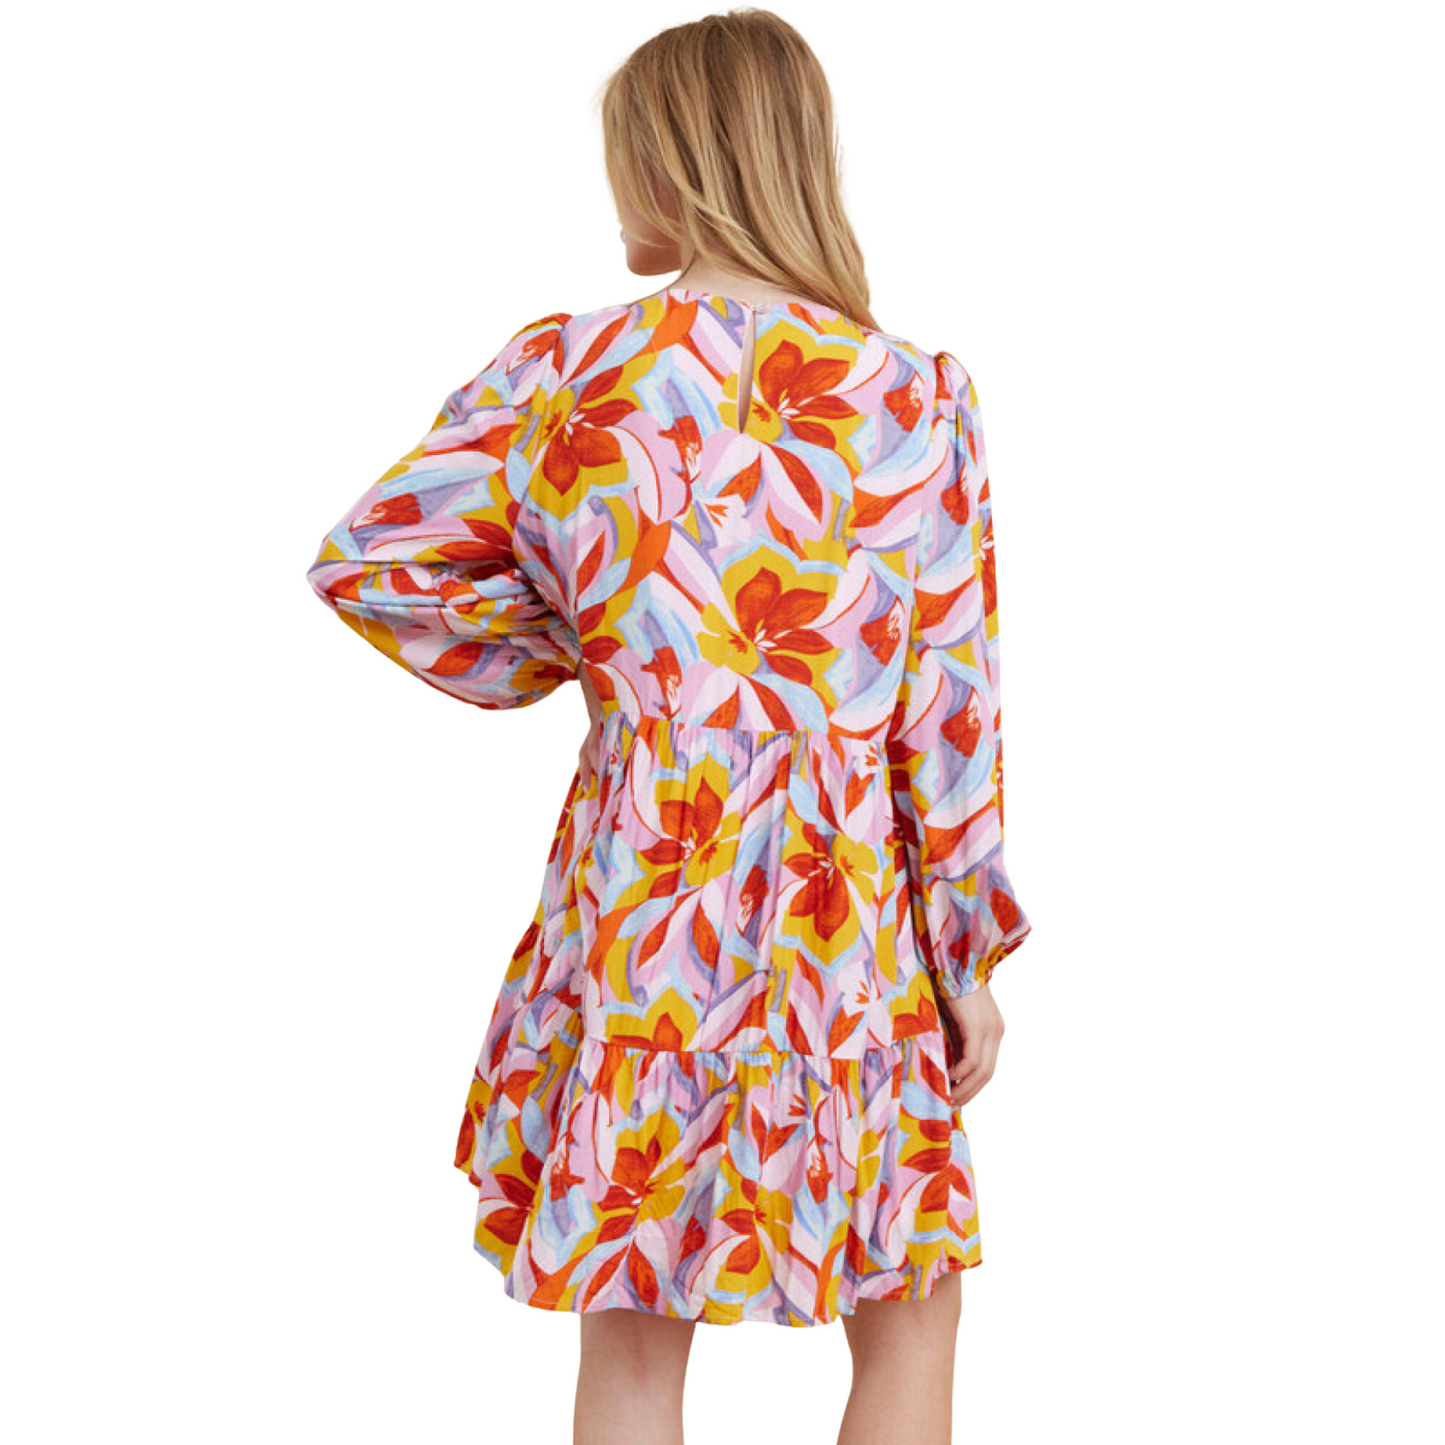 This Flower Print Mini Dress offers a U-neck cut and long peasant sleeves for a stylish, trendy look, all while ensuring a lightweight and comfortable fit. Crafted from non-sheer and unlined fabric, it's finished with a back keyhole and tiered layers for a modern silhouette. Plus size available.